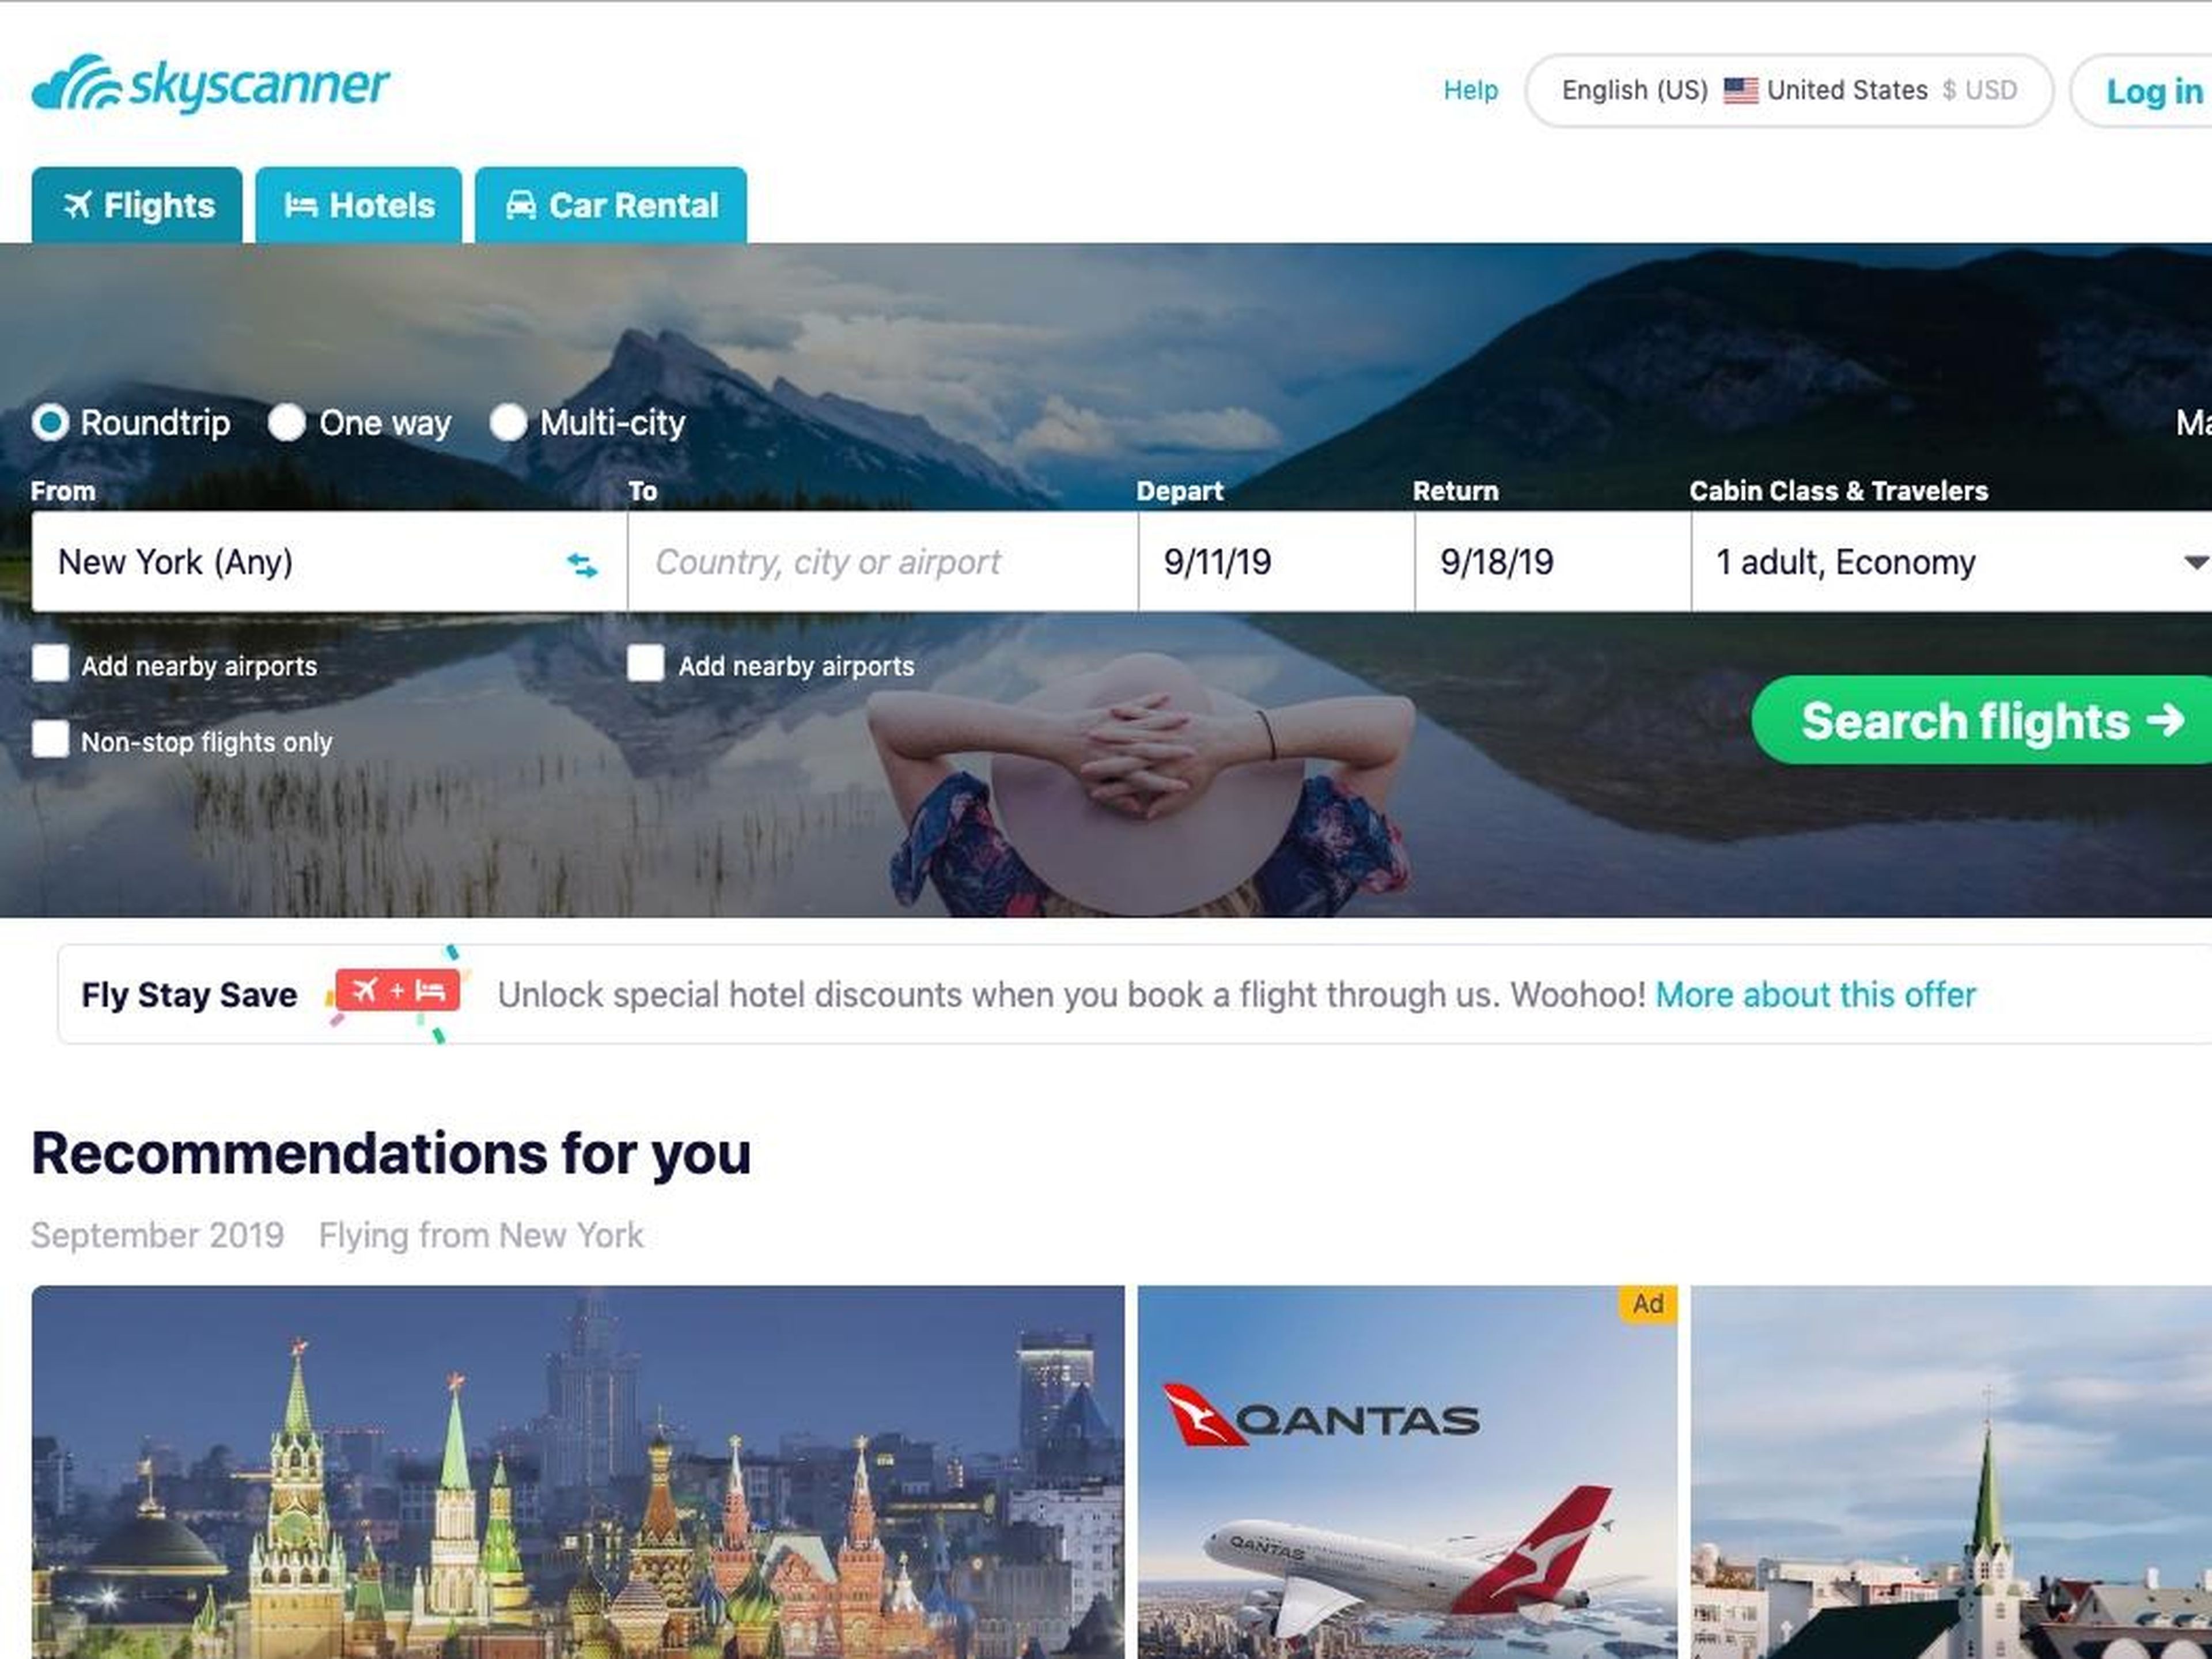 Use the website Skyscanner to find the lowest fares